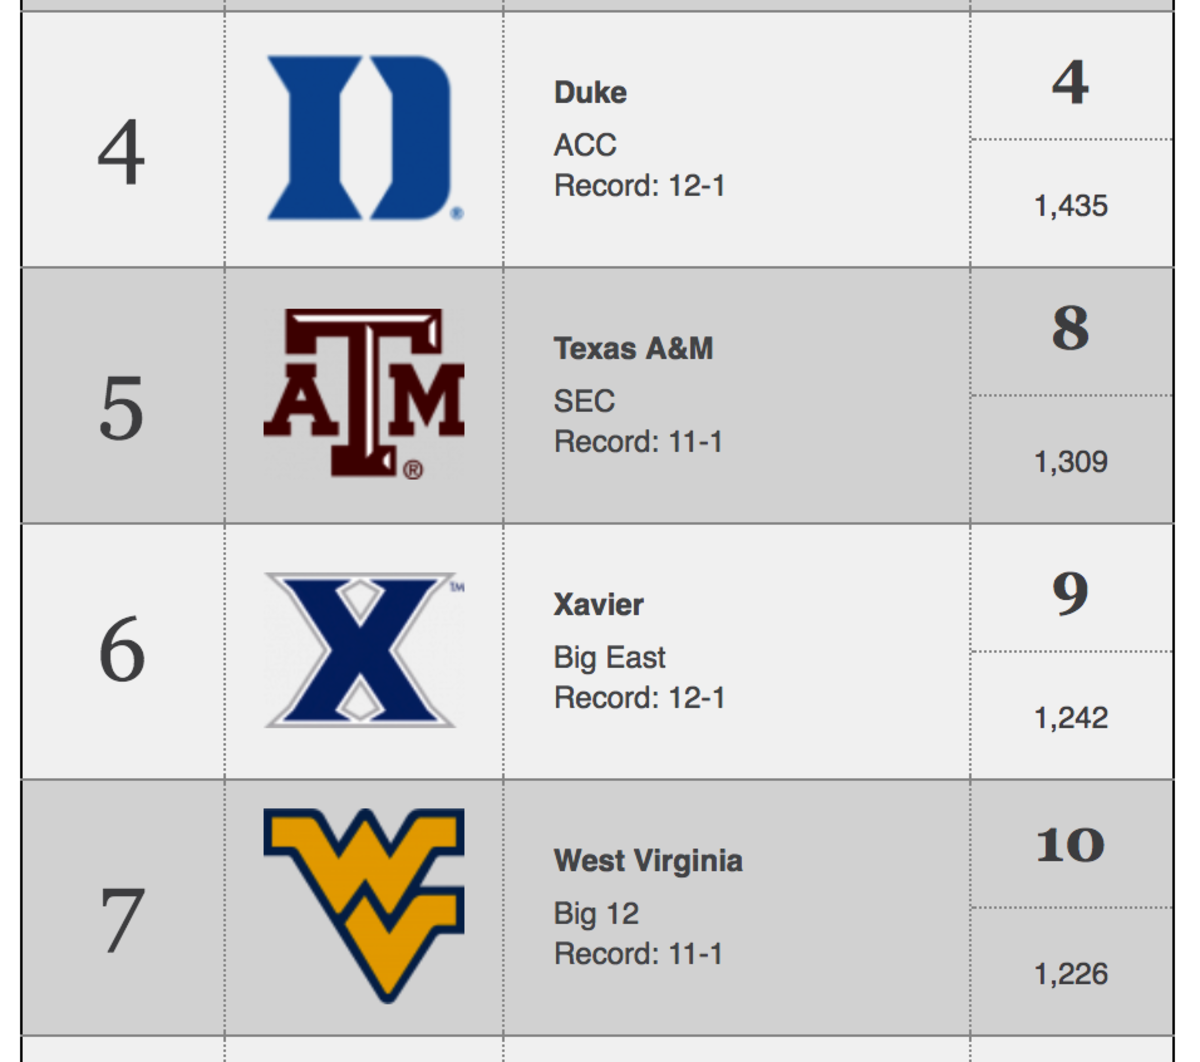 Week 8 of the AP College Basketball Poll.